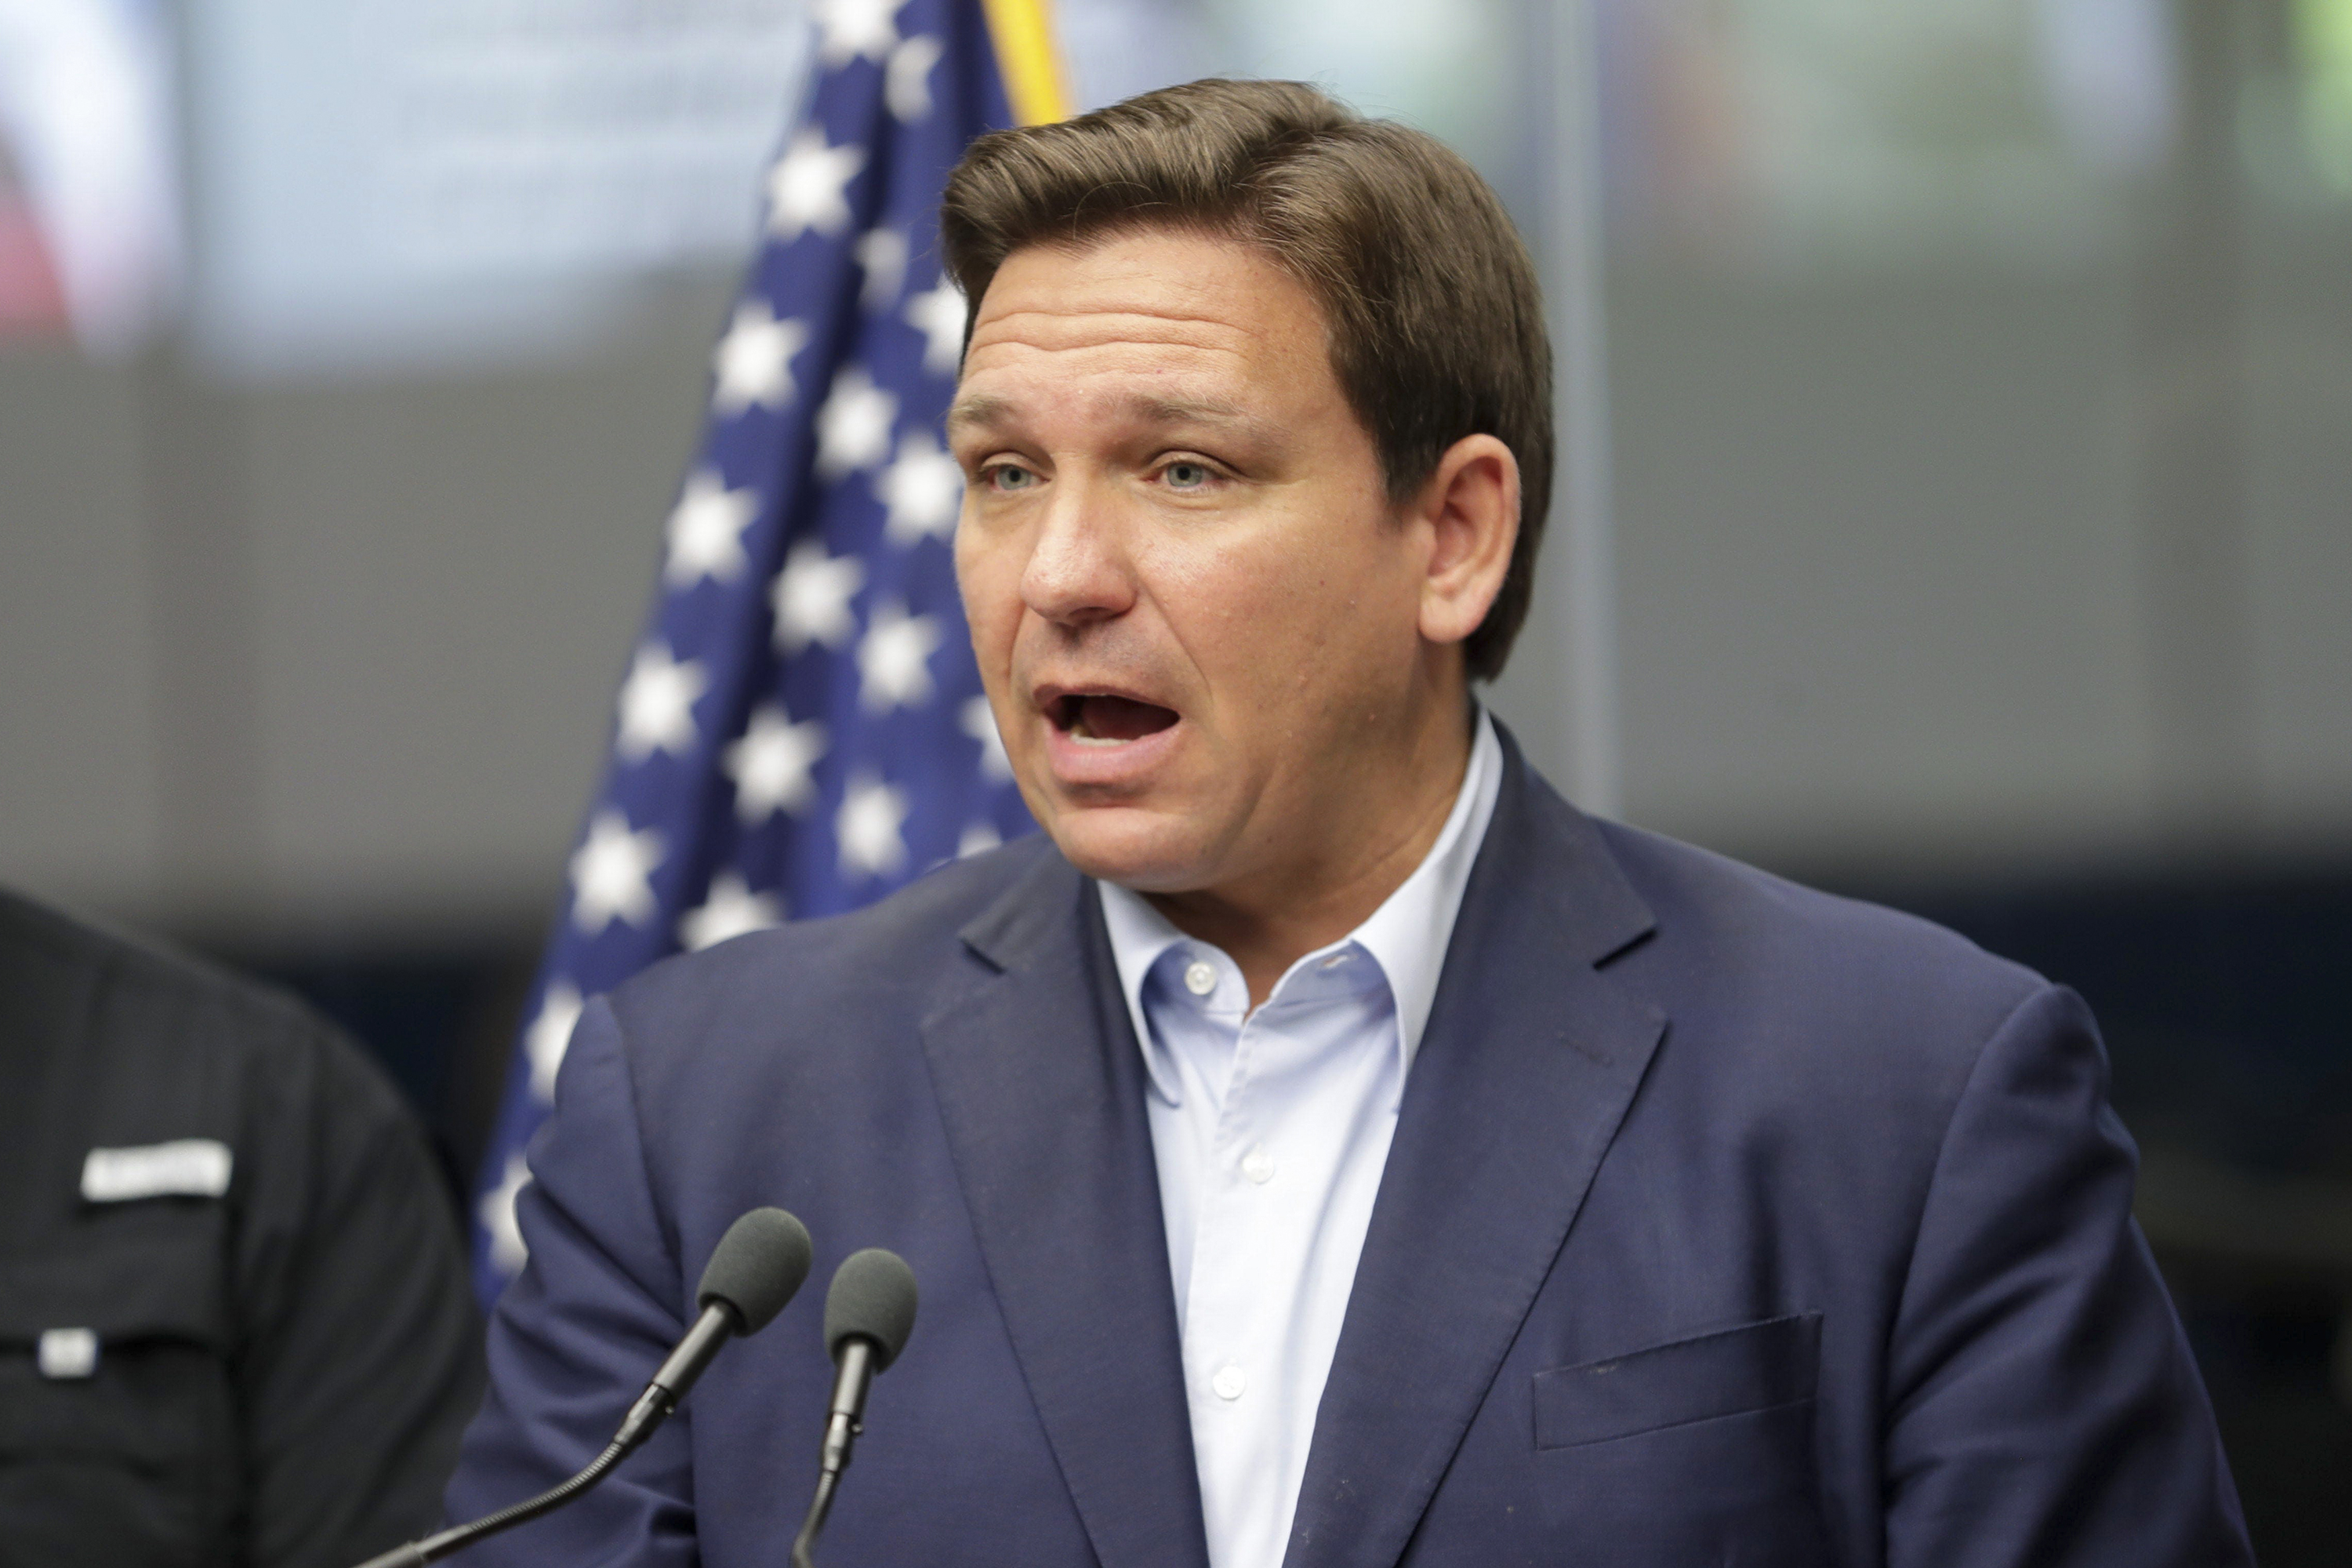 Florida Gov. Ron DeSantis speaks during a news conference at the Emergency Operations Center in Tallahassee, Florida on September 25.